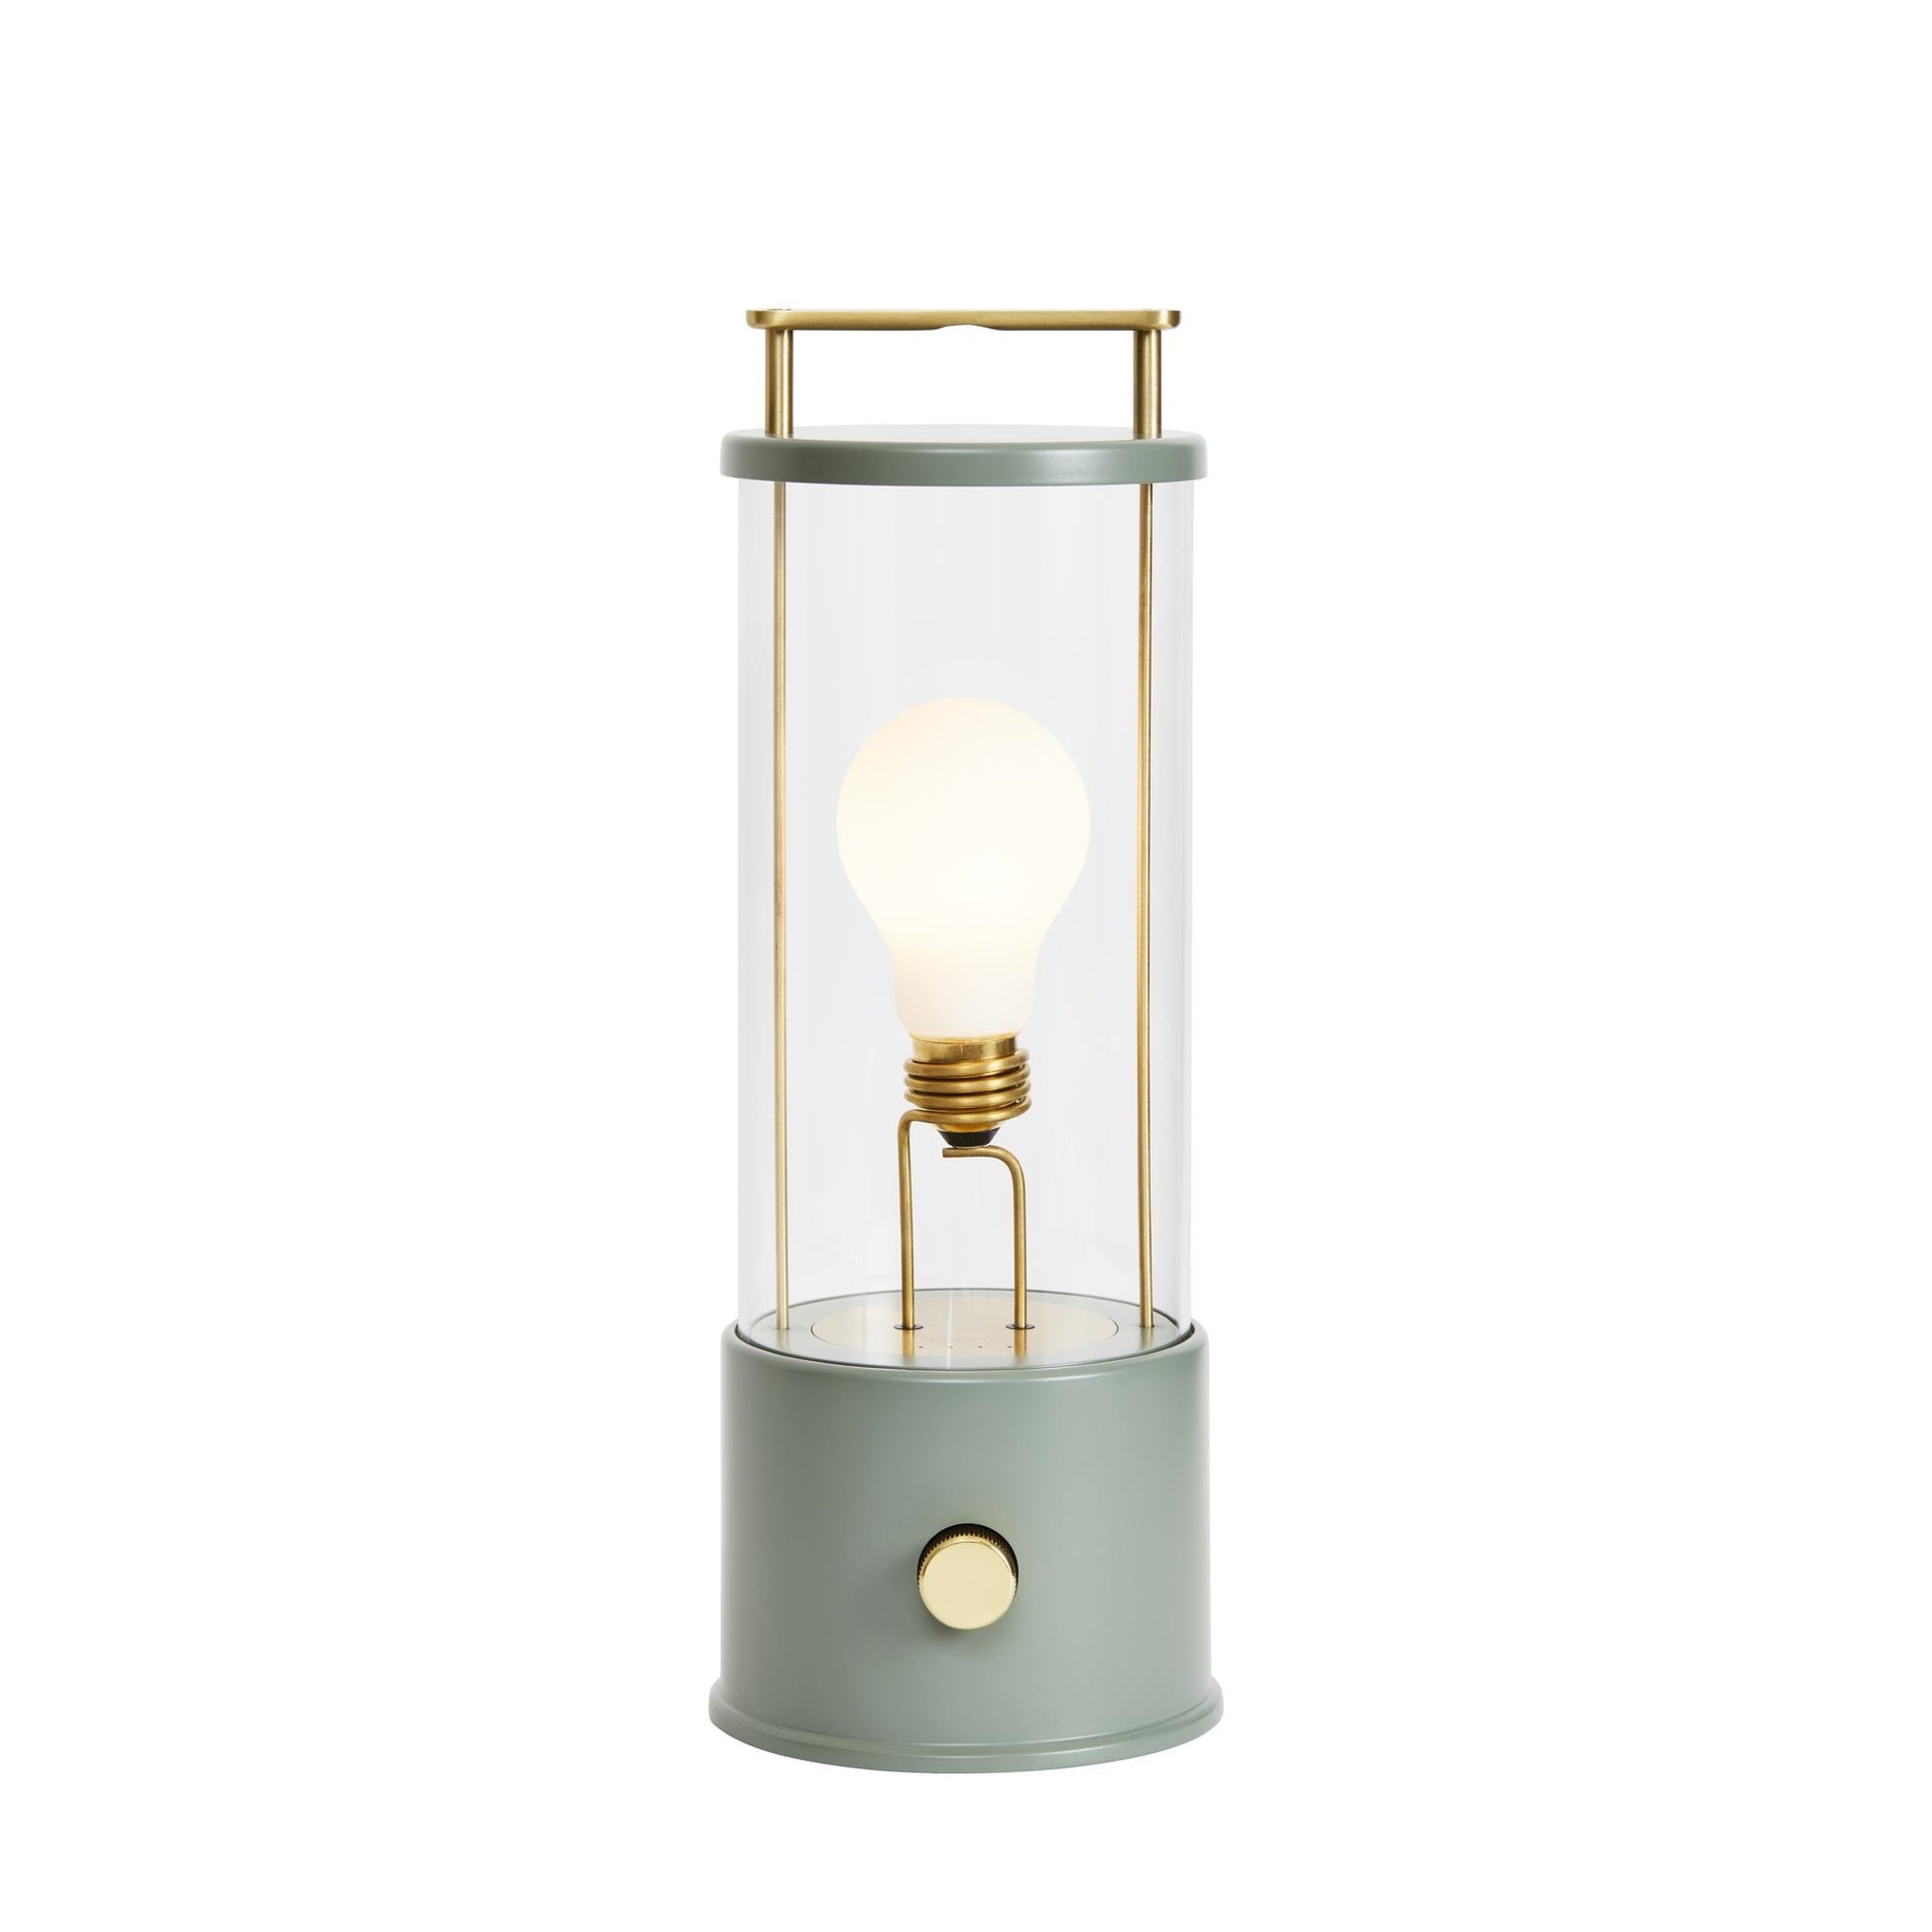 The Muse Portable Lamp by Tala #Pleasure Garden